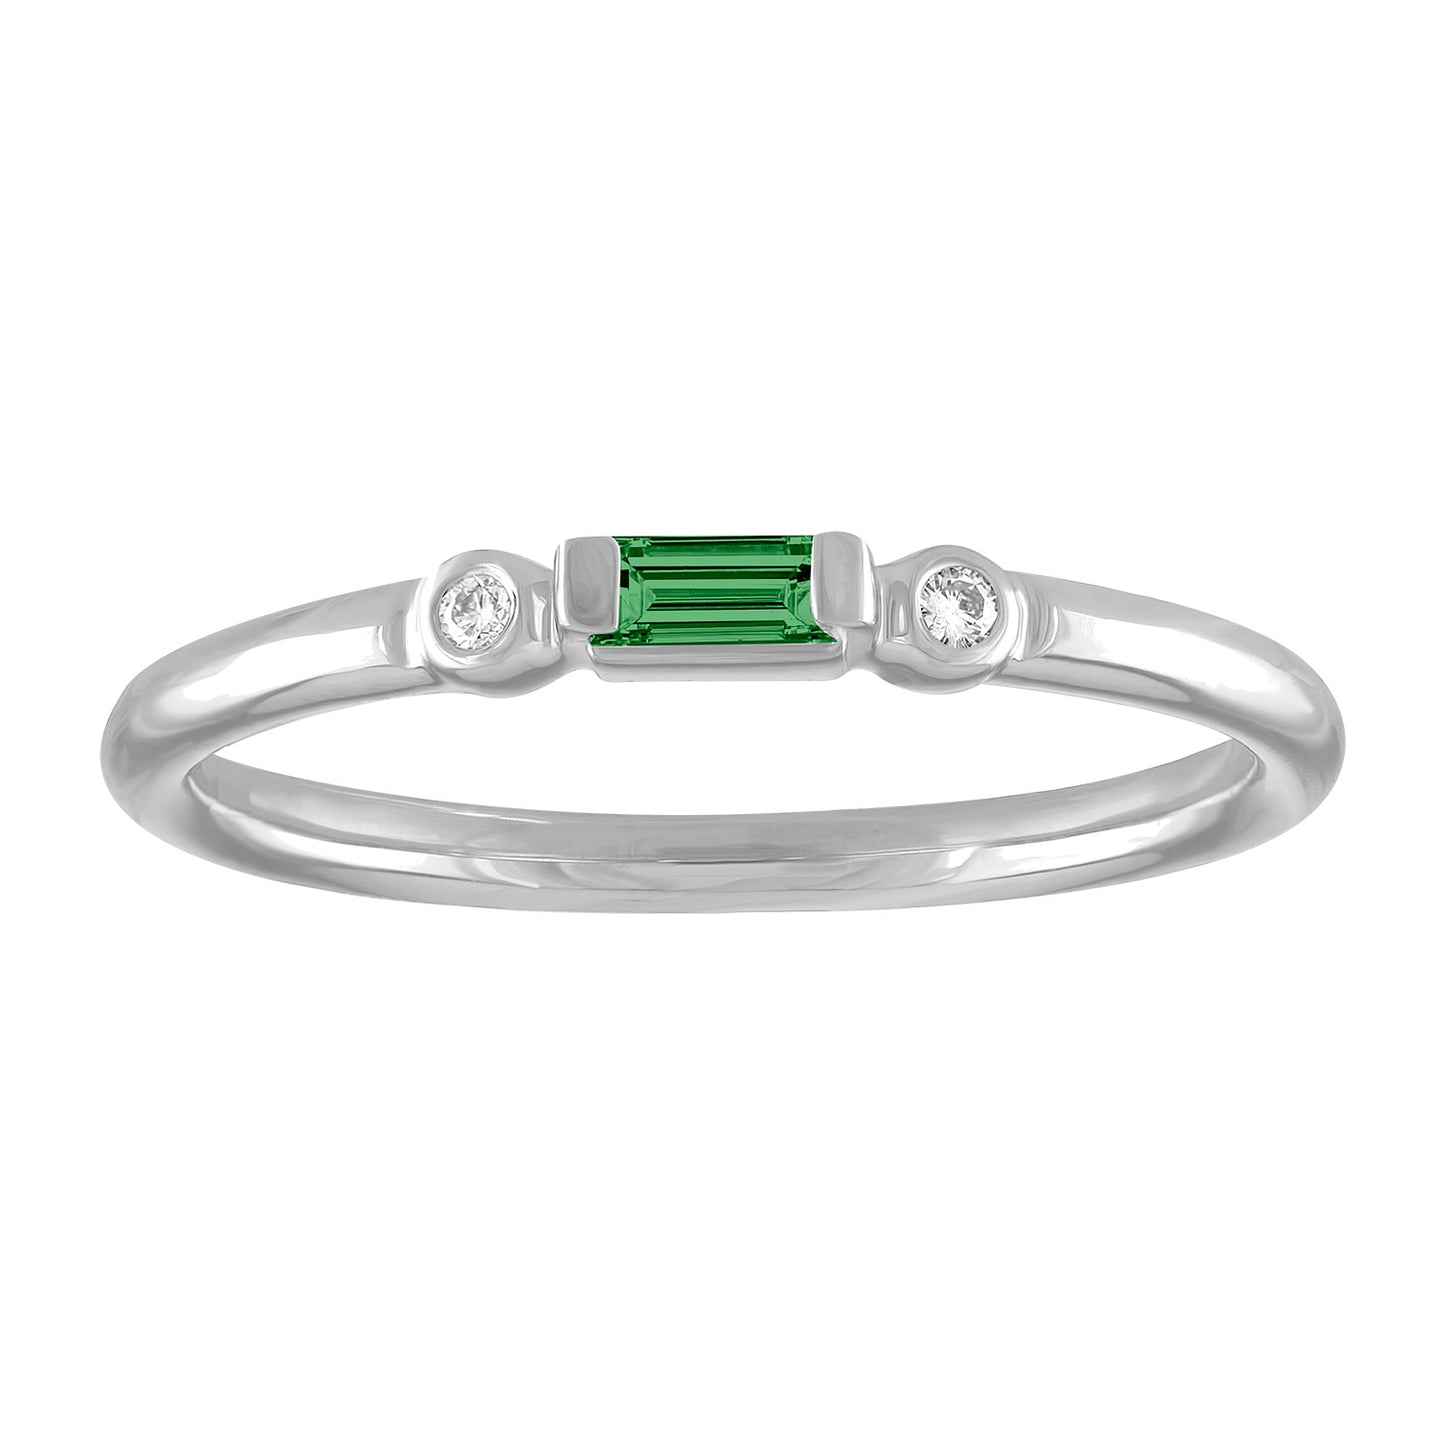 White gold skinny band with an emerald baguette in the center and two round diamonds on the side. 